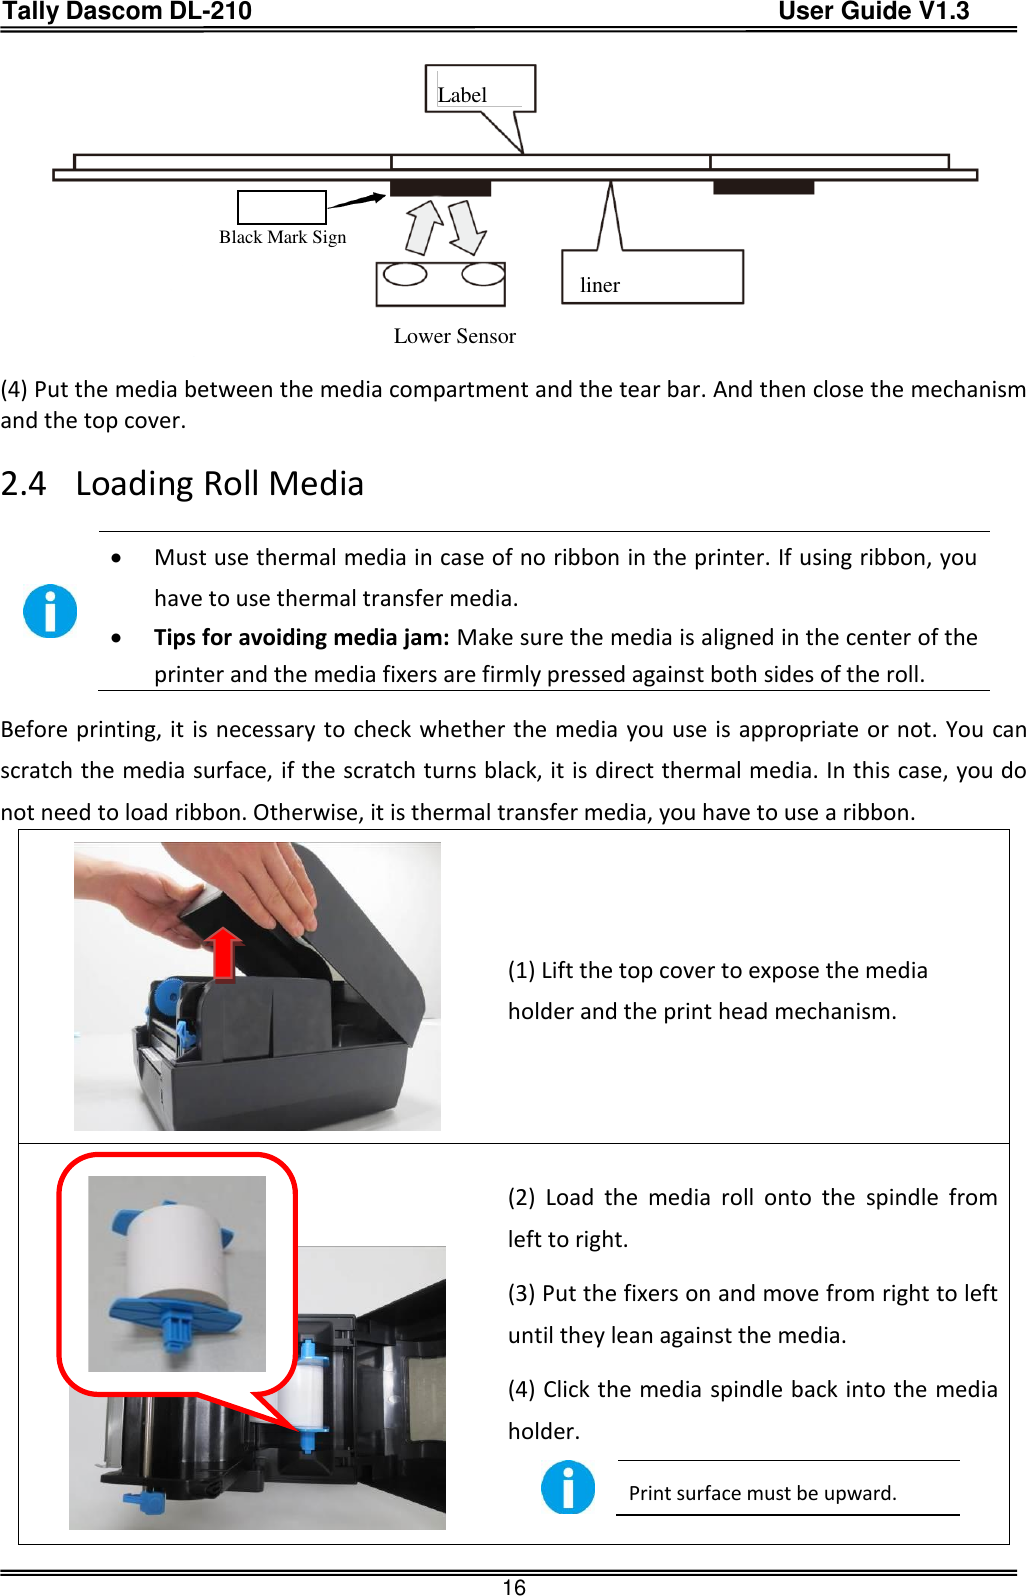 Tally Dascom DL-210                                          User Guide V1.3  16                      Label                Black Mark Sign                              liner                    Lower Sensor            (4) Put the media between the media compartment and the tear bar. And then close the mechanism and the top cover.  2.4 Loading Roll Media    Must use thermal media in case of no ribbon in the printer. If using ribbon, you have to use thermal transfer media.  Tips for avoiding media jam: Make sure the media is aligned in the center of the printer and the media fixers are firmly pressed against both sides of the roll. Before printing, it is necessary to check whether the media you use is appropriate or not. You can scratch the media surface, if the scratch turns black, it is direct thermal media. In this case, you do not need to load ribbon. Otherwise, it is thermal transfer media, you have to use a ribbon.  (1) Lift the top cover to expose the media holder and the print head mechanism.    (2)  Load  the  media  roll  onto  the  spindle  from left to right.  (3) Put the fixers on and move from right to left until they lean against the media.   (4) Click the media spindle back into the media holder.  Print surface must be upward.   